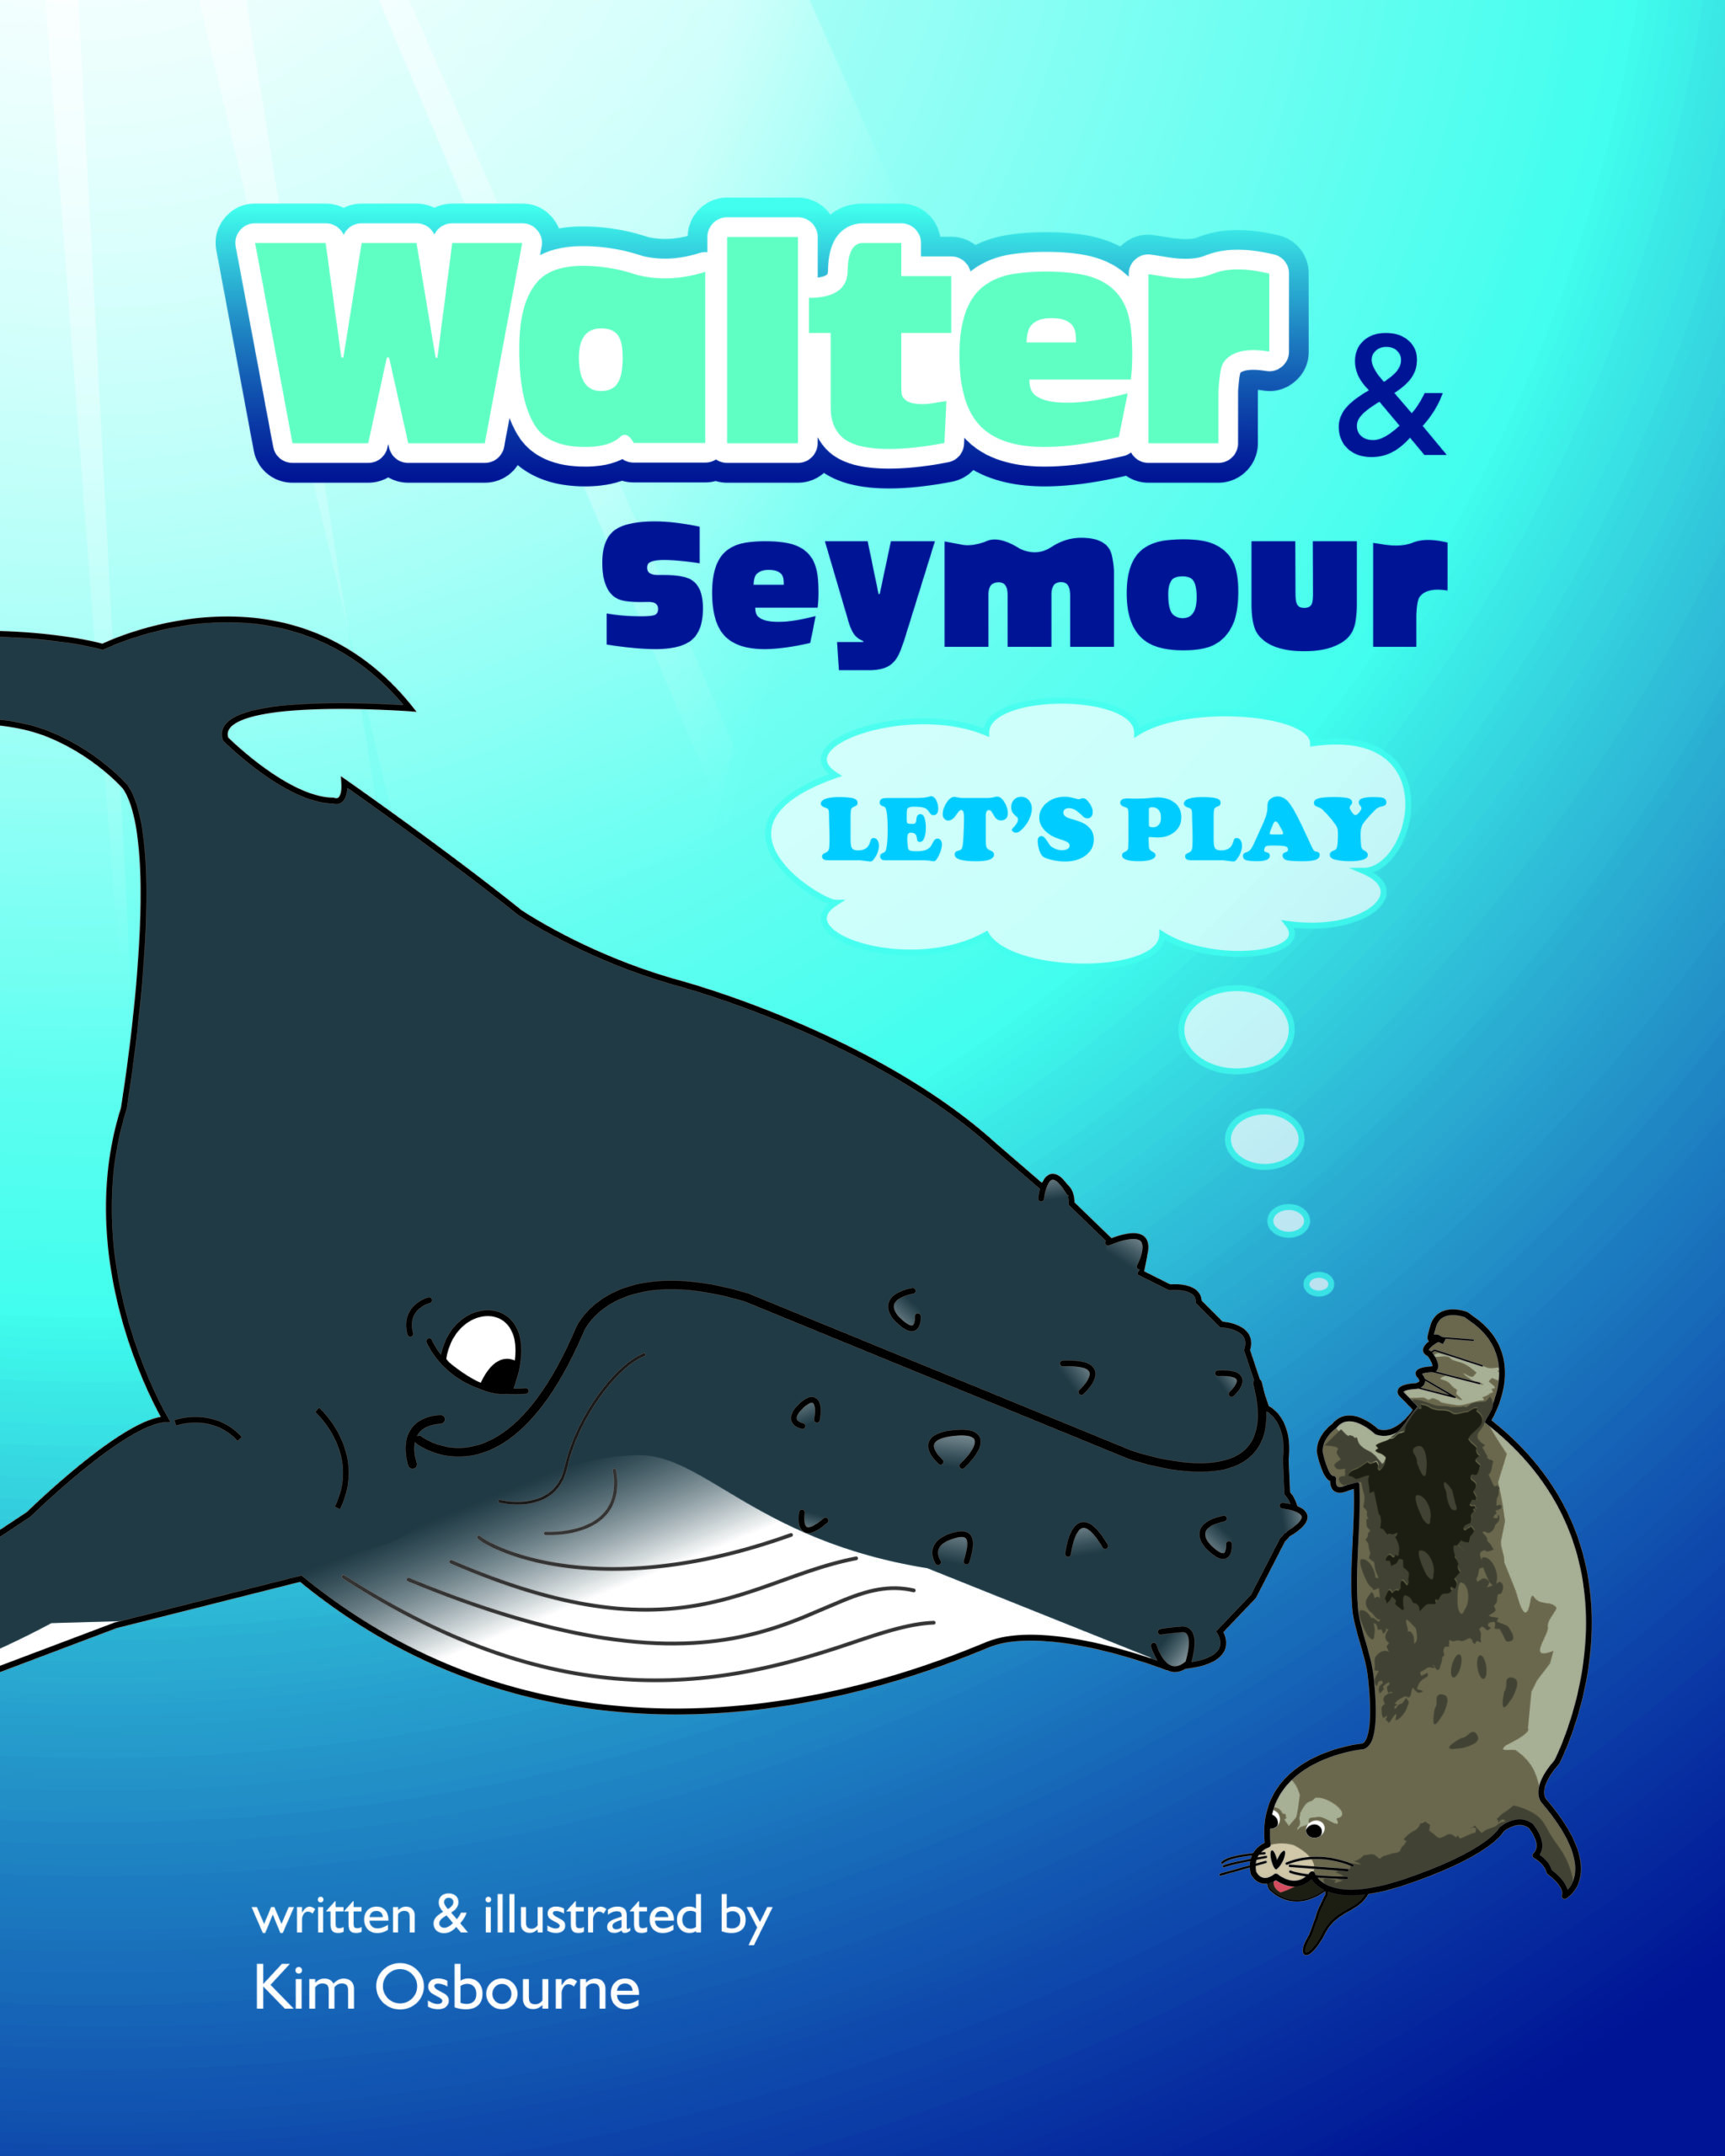 Front cover featuring Walter the whale and Seymour the seal over a blue background.